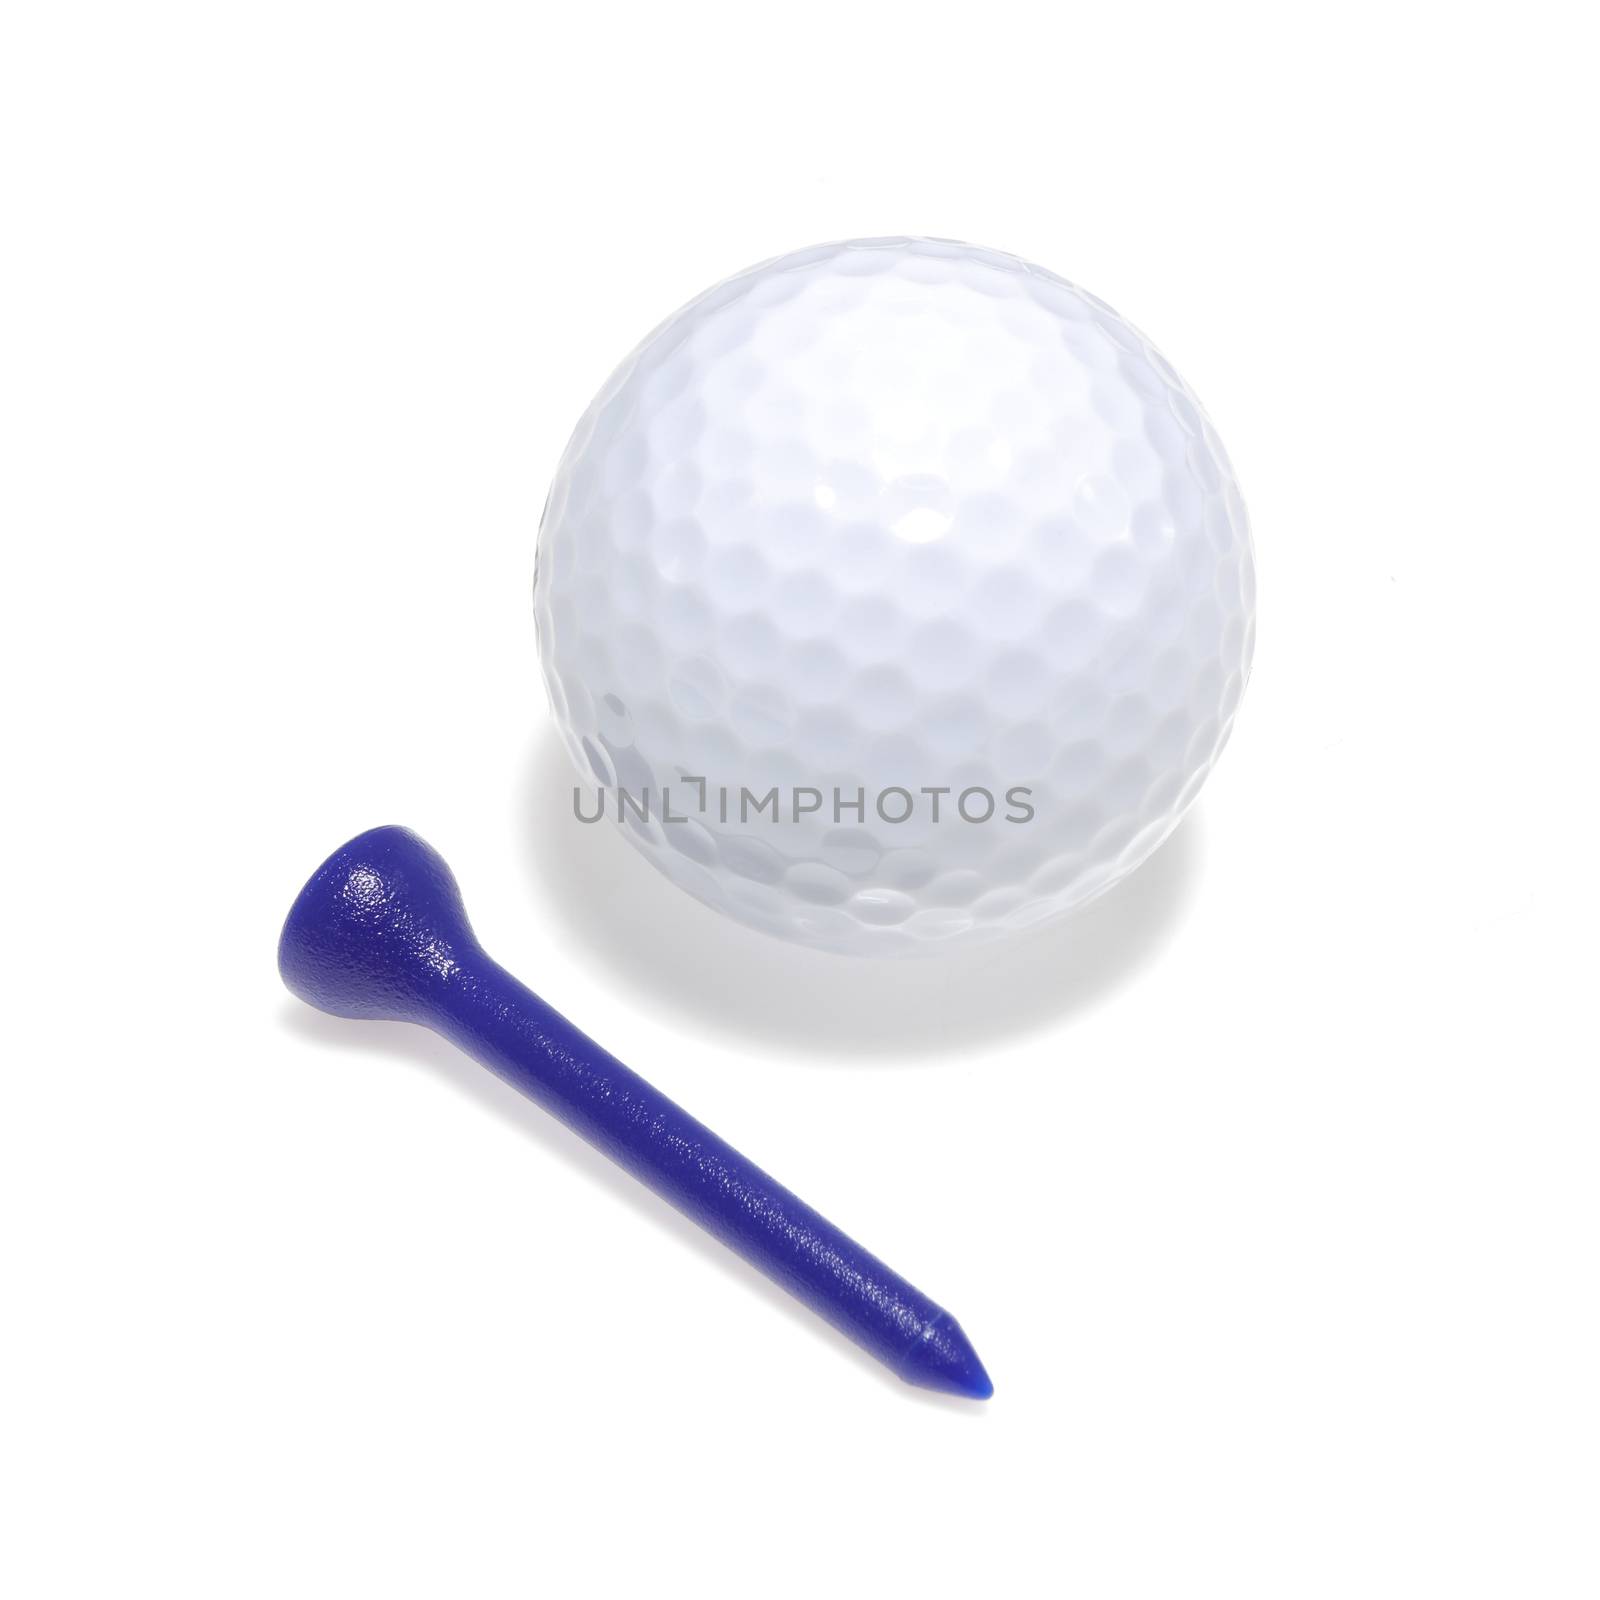 Golf ball and tee with drop shadow